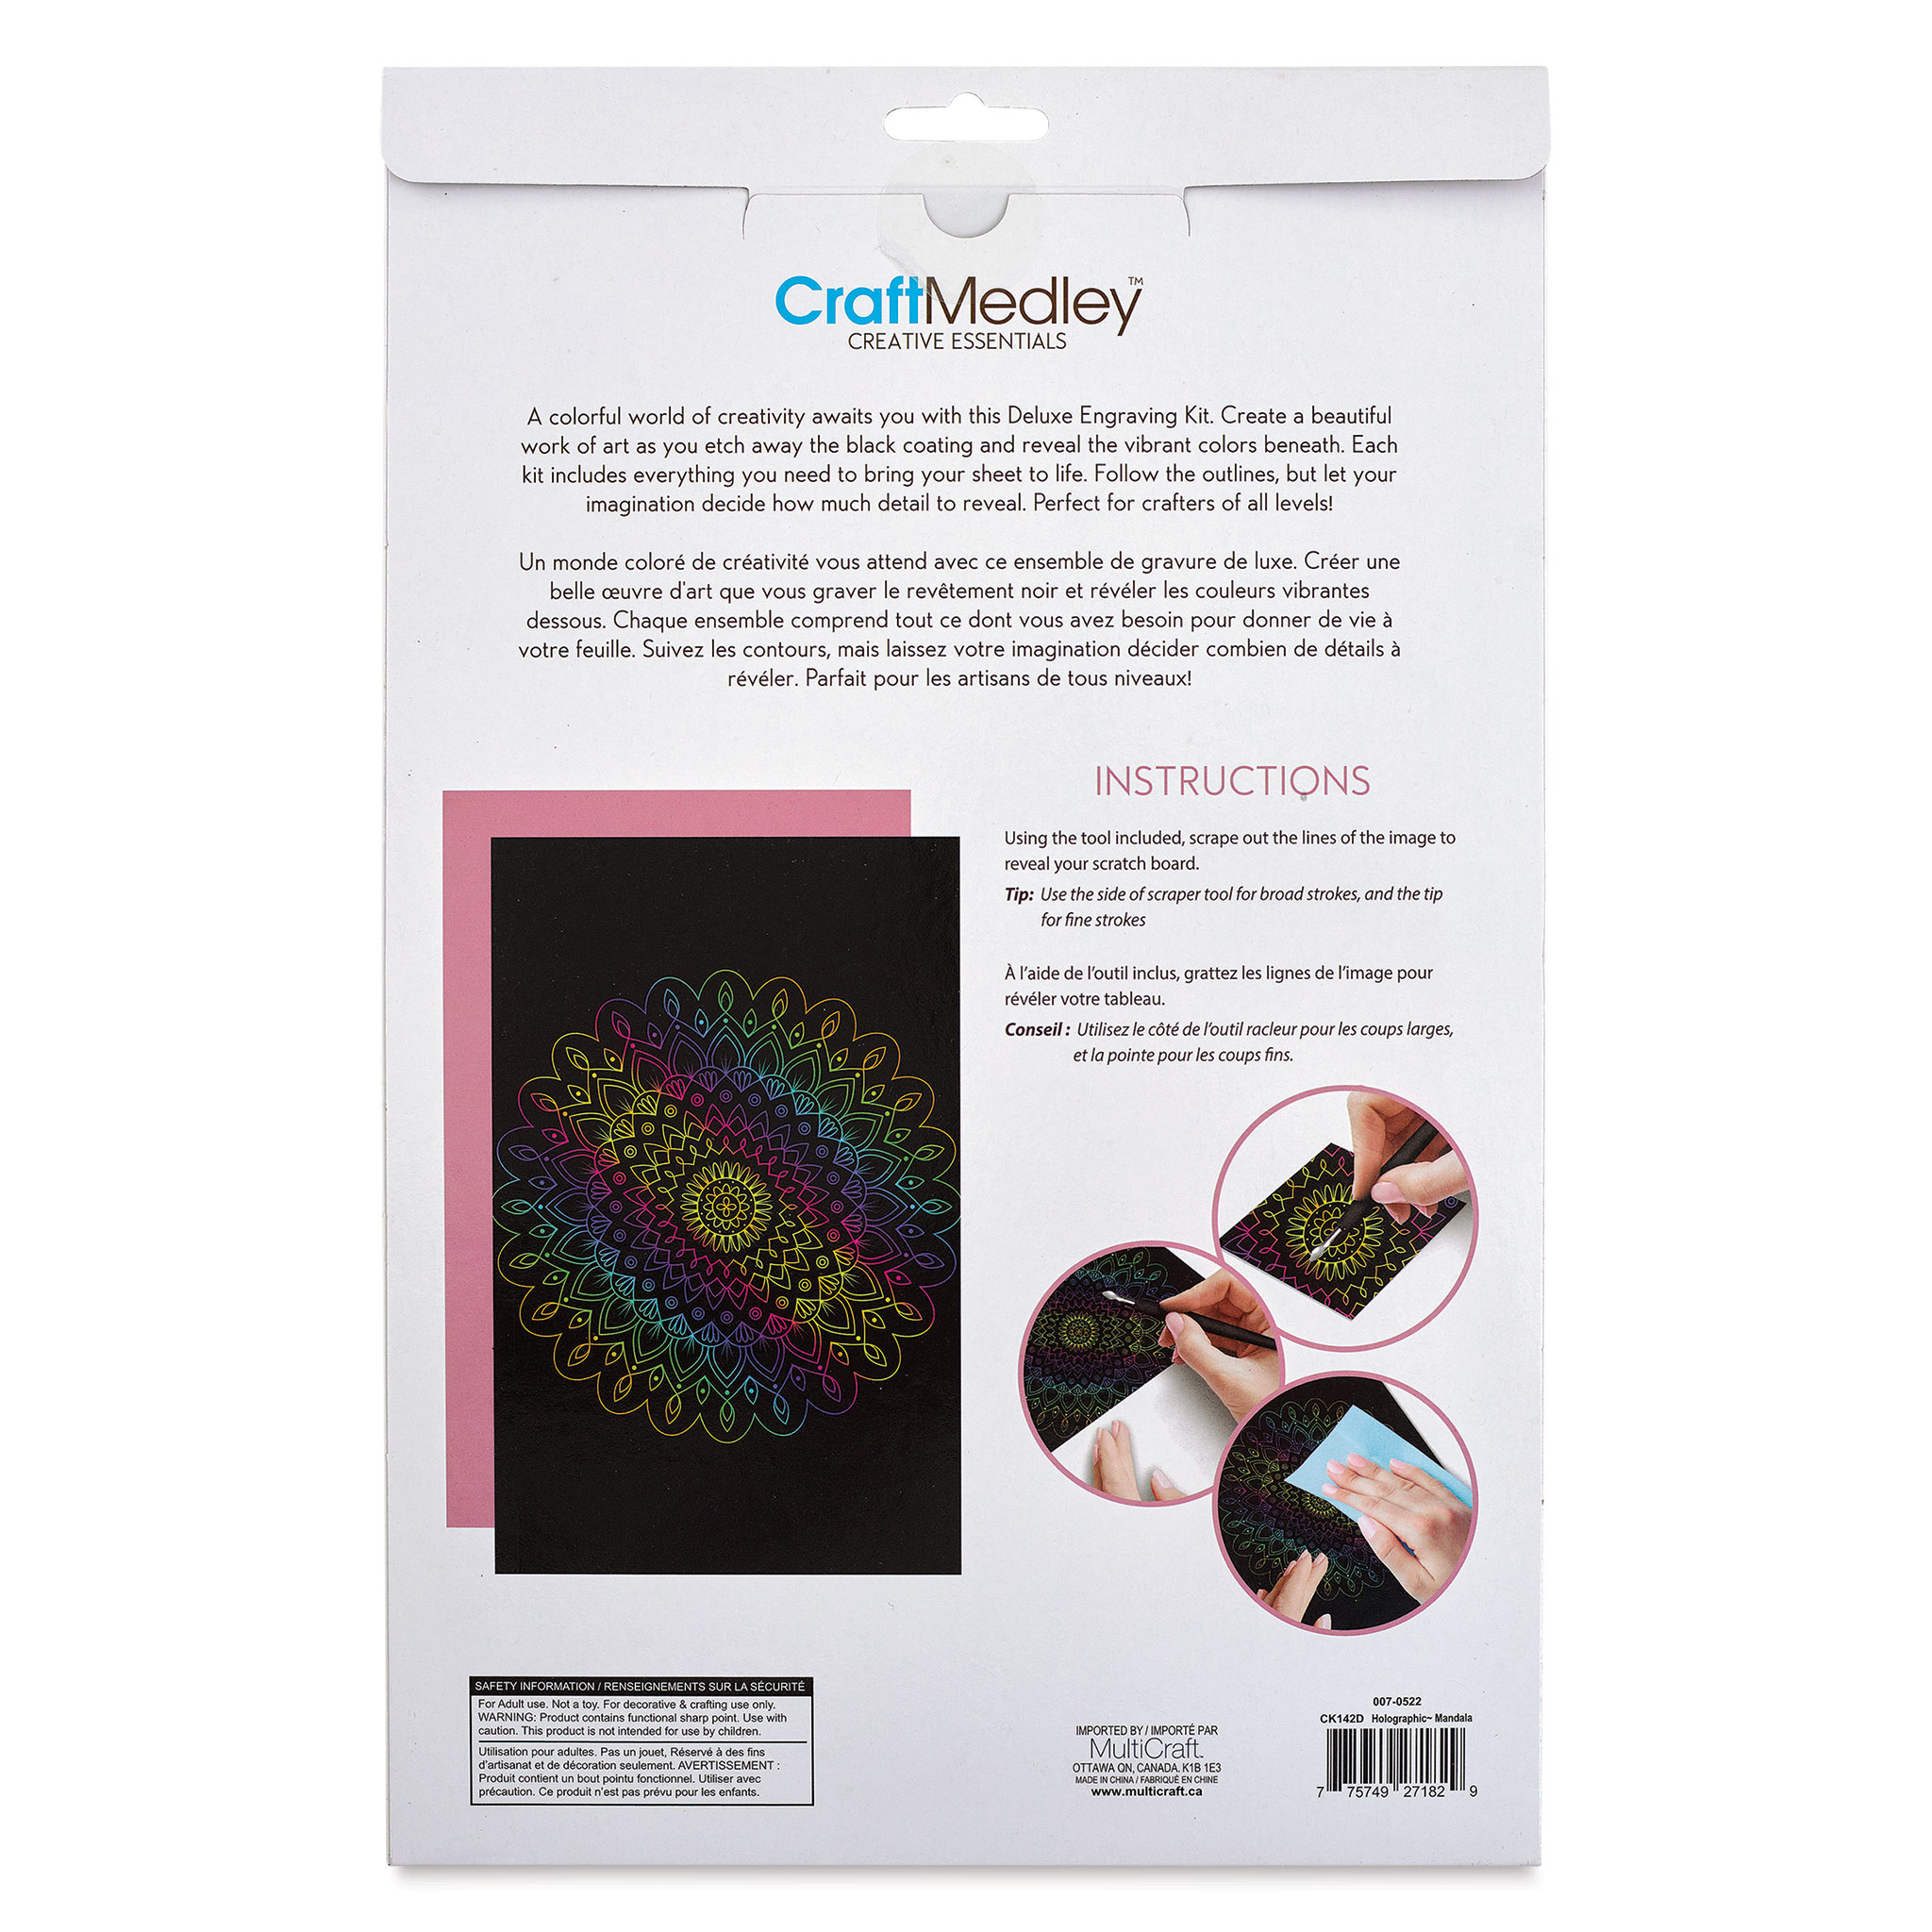 Craft Medley Deluxe Engraving Kits